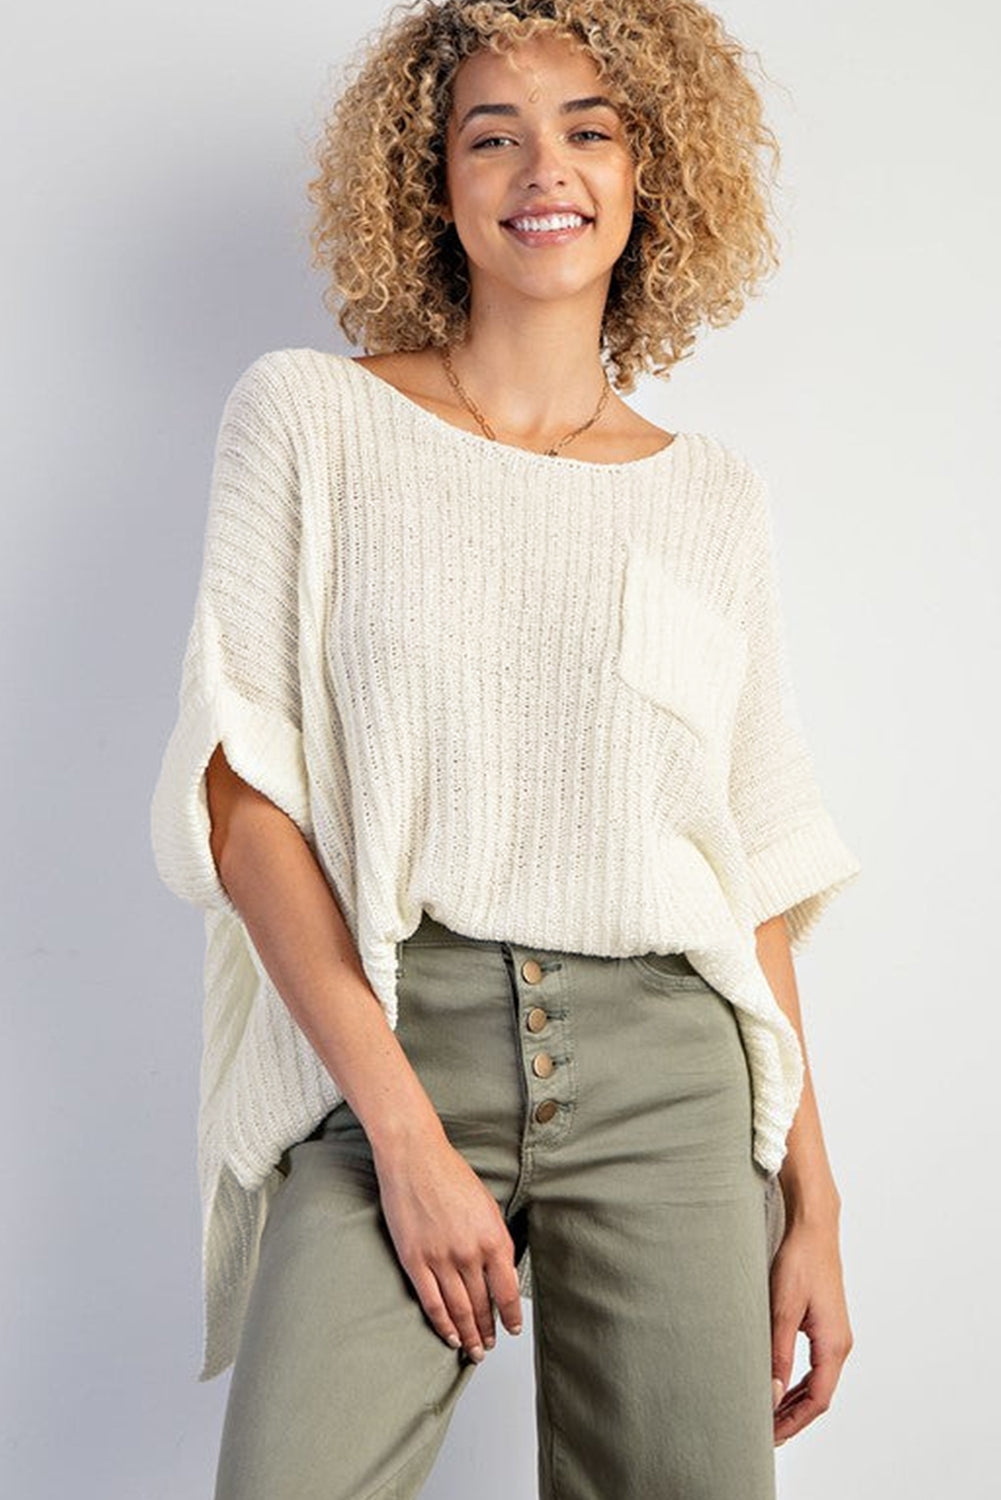 White Knit Patched Pocket Split Baggy Short Sleeve Top